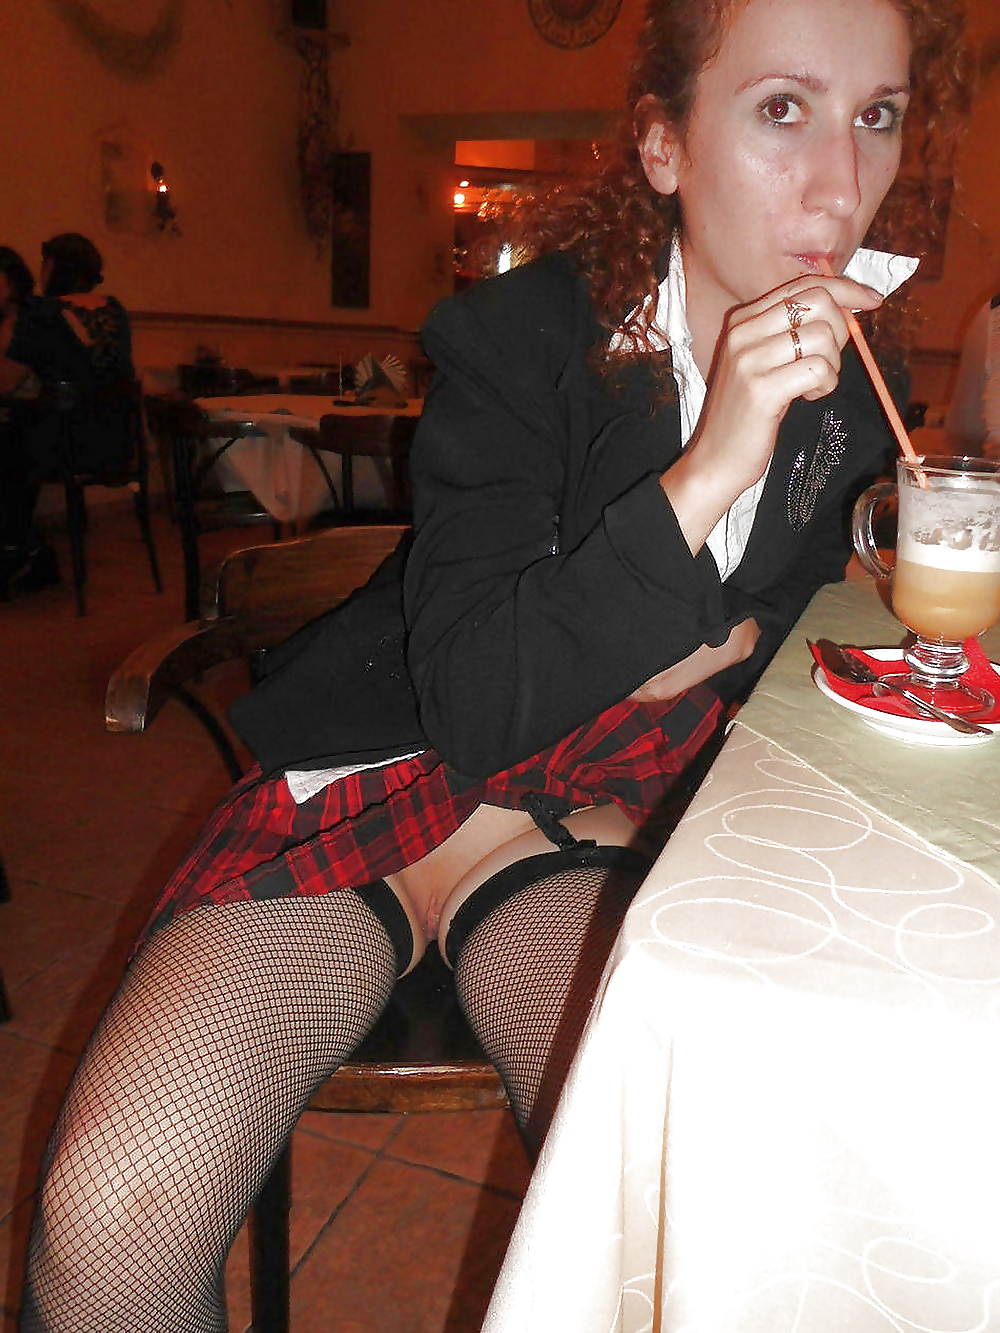 Sluts in nylons came to our Bar for Sex & more #22336798